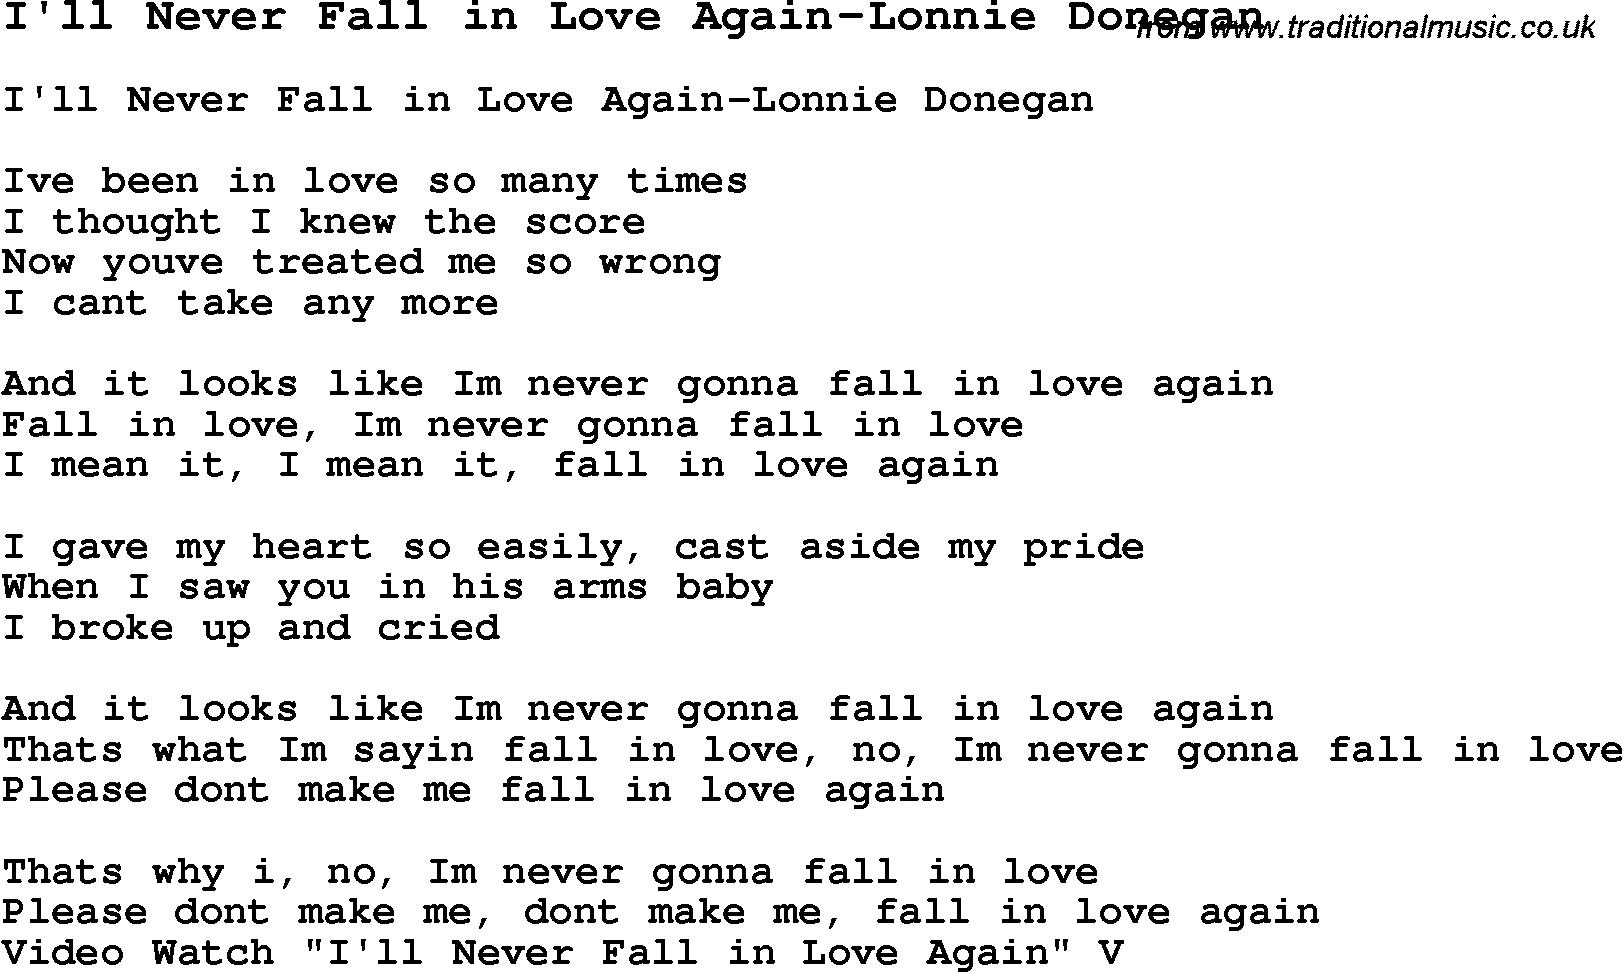 Skiffle Song Lyrics for I'll Never Fall In Love Again-Lonnie Donegan.